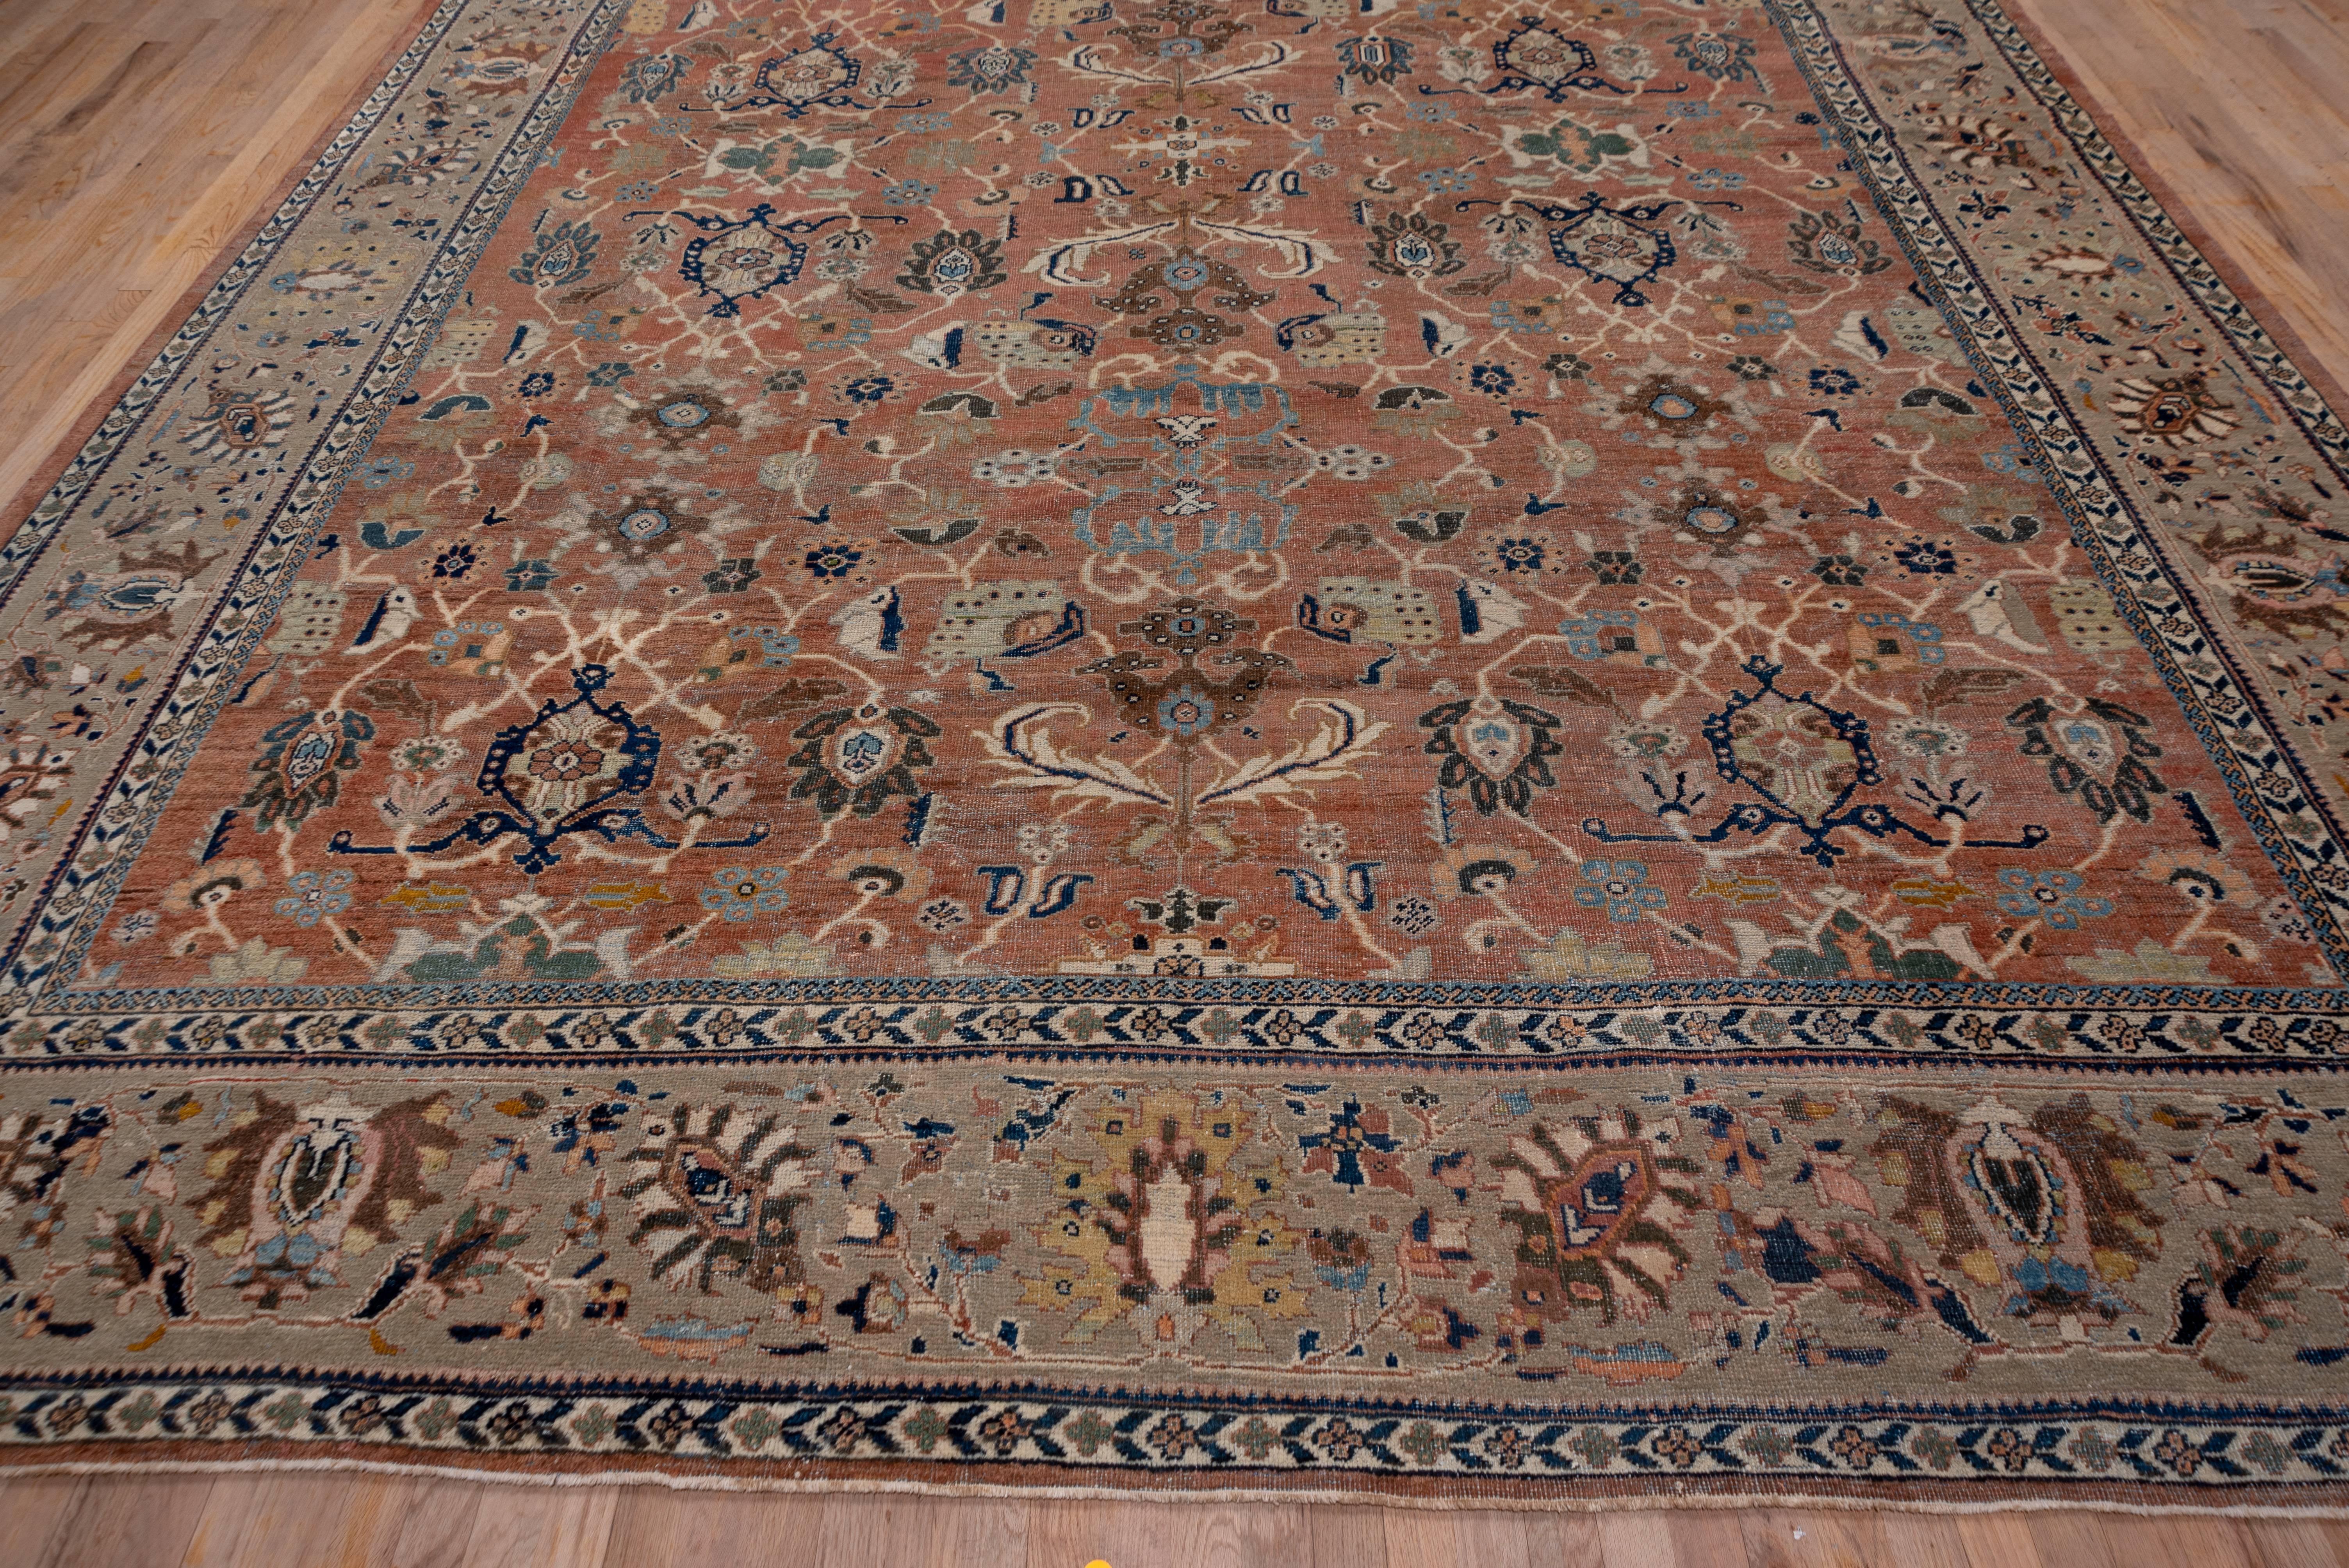 The rust brown field of this informally rendered West Persian village carpet shows an all-over pattern of palmettes, vine segments, rosettes and 